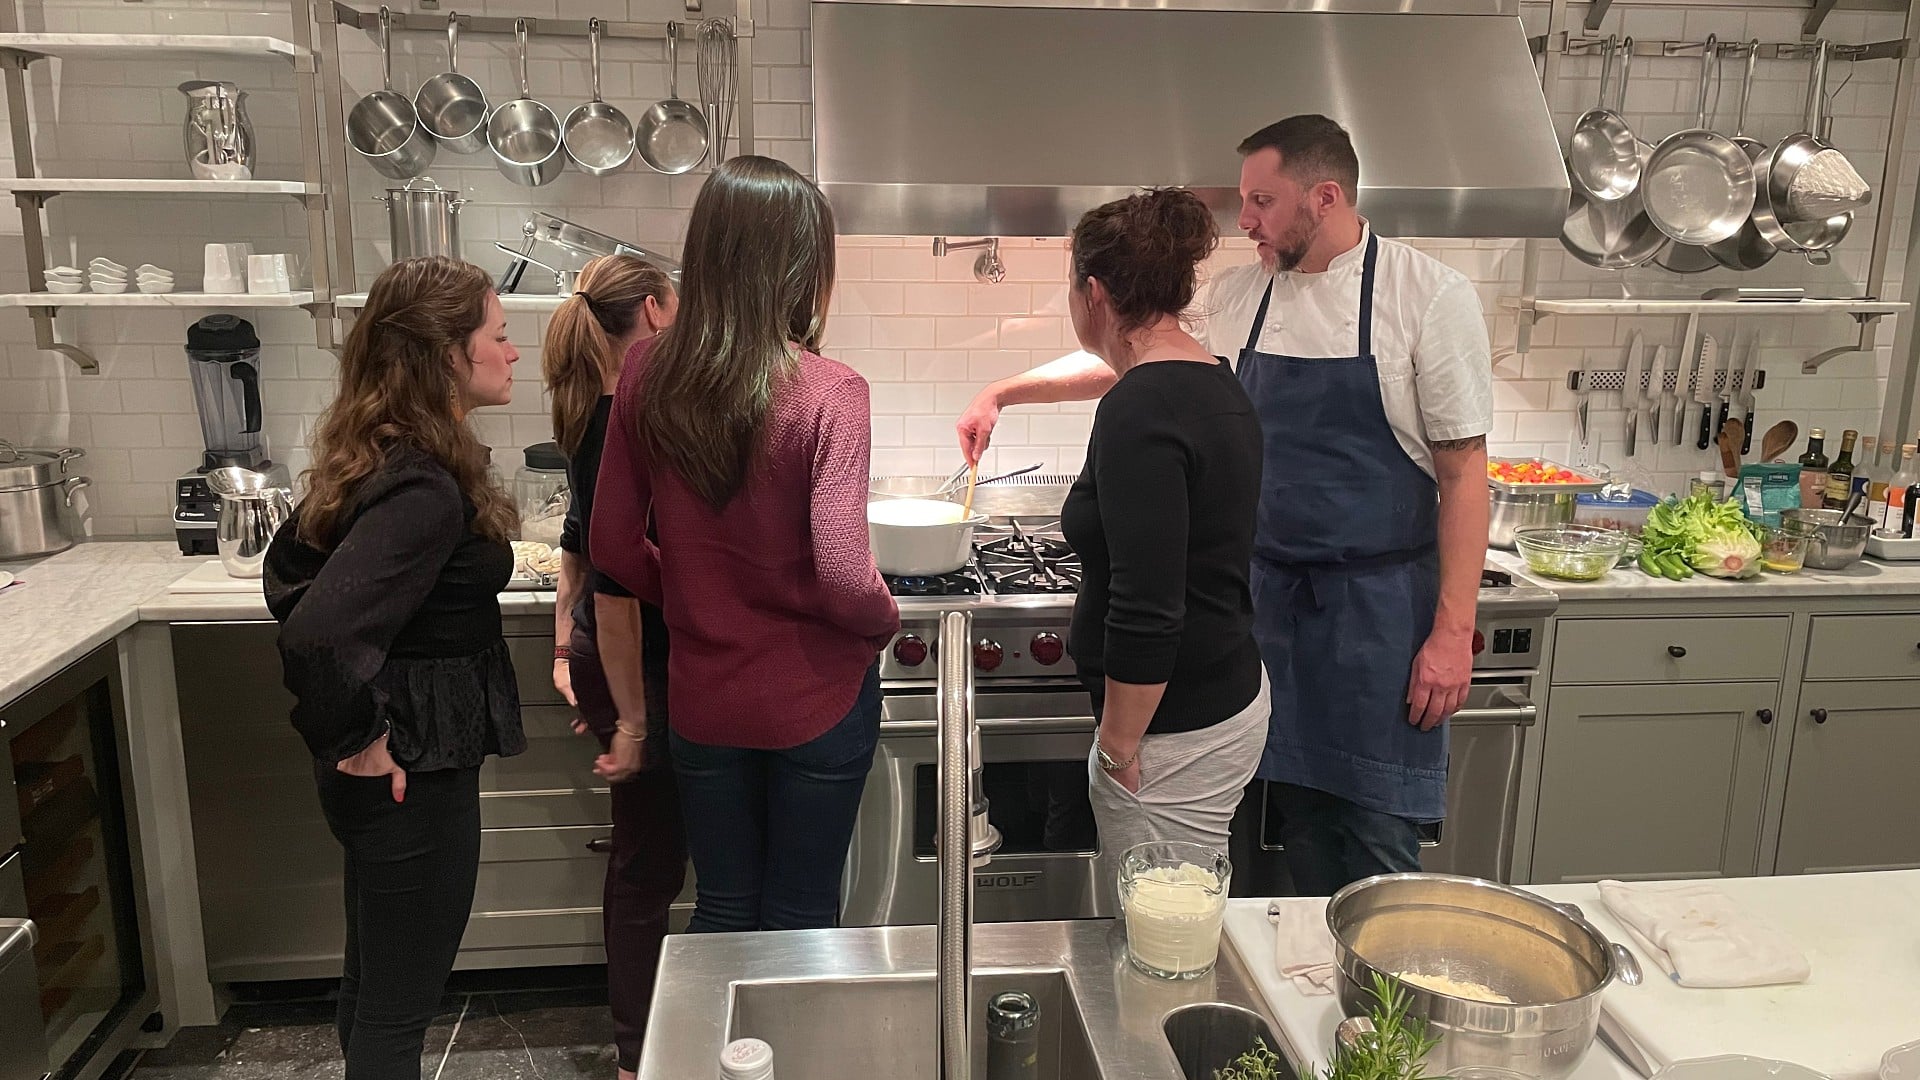 A chef in a blue apron standing at the stove in a chef's kitchen teaching four women